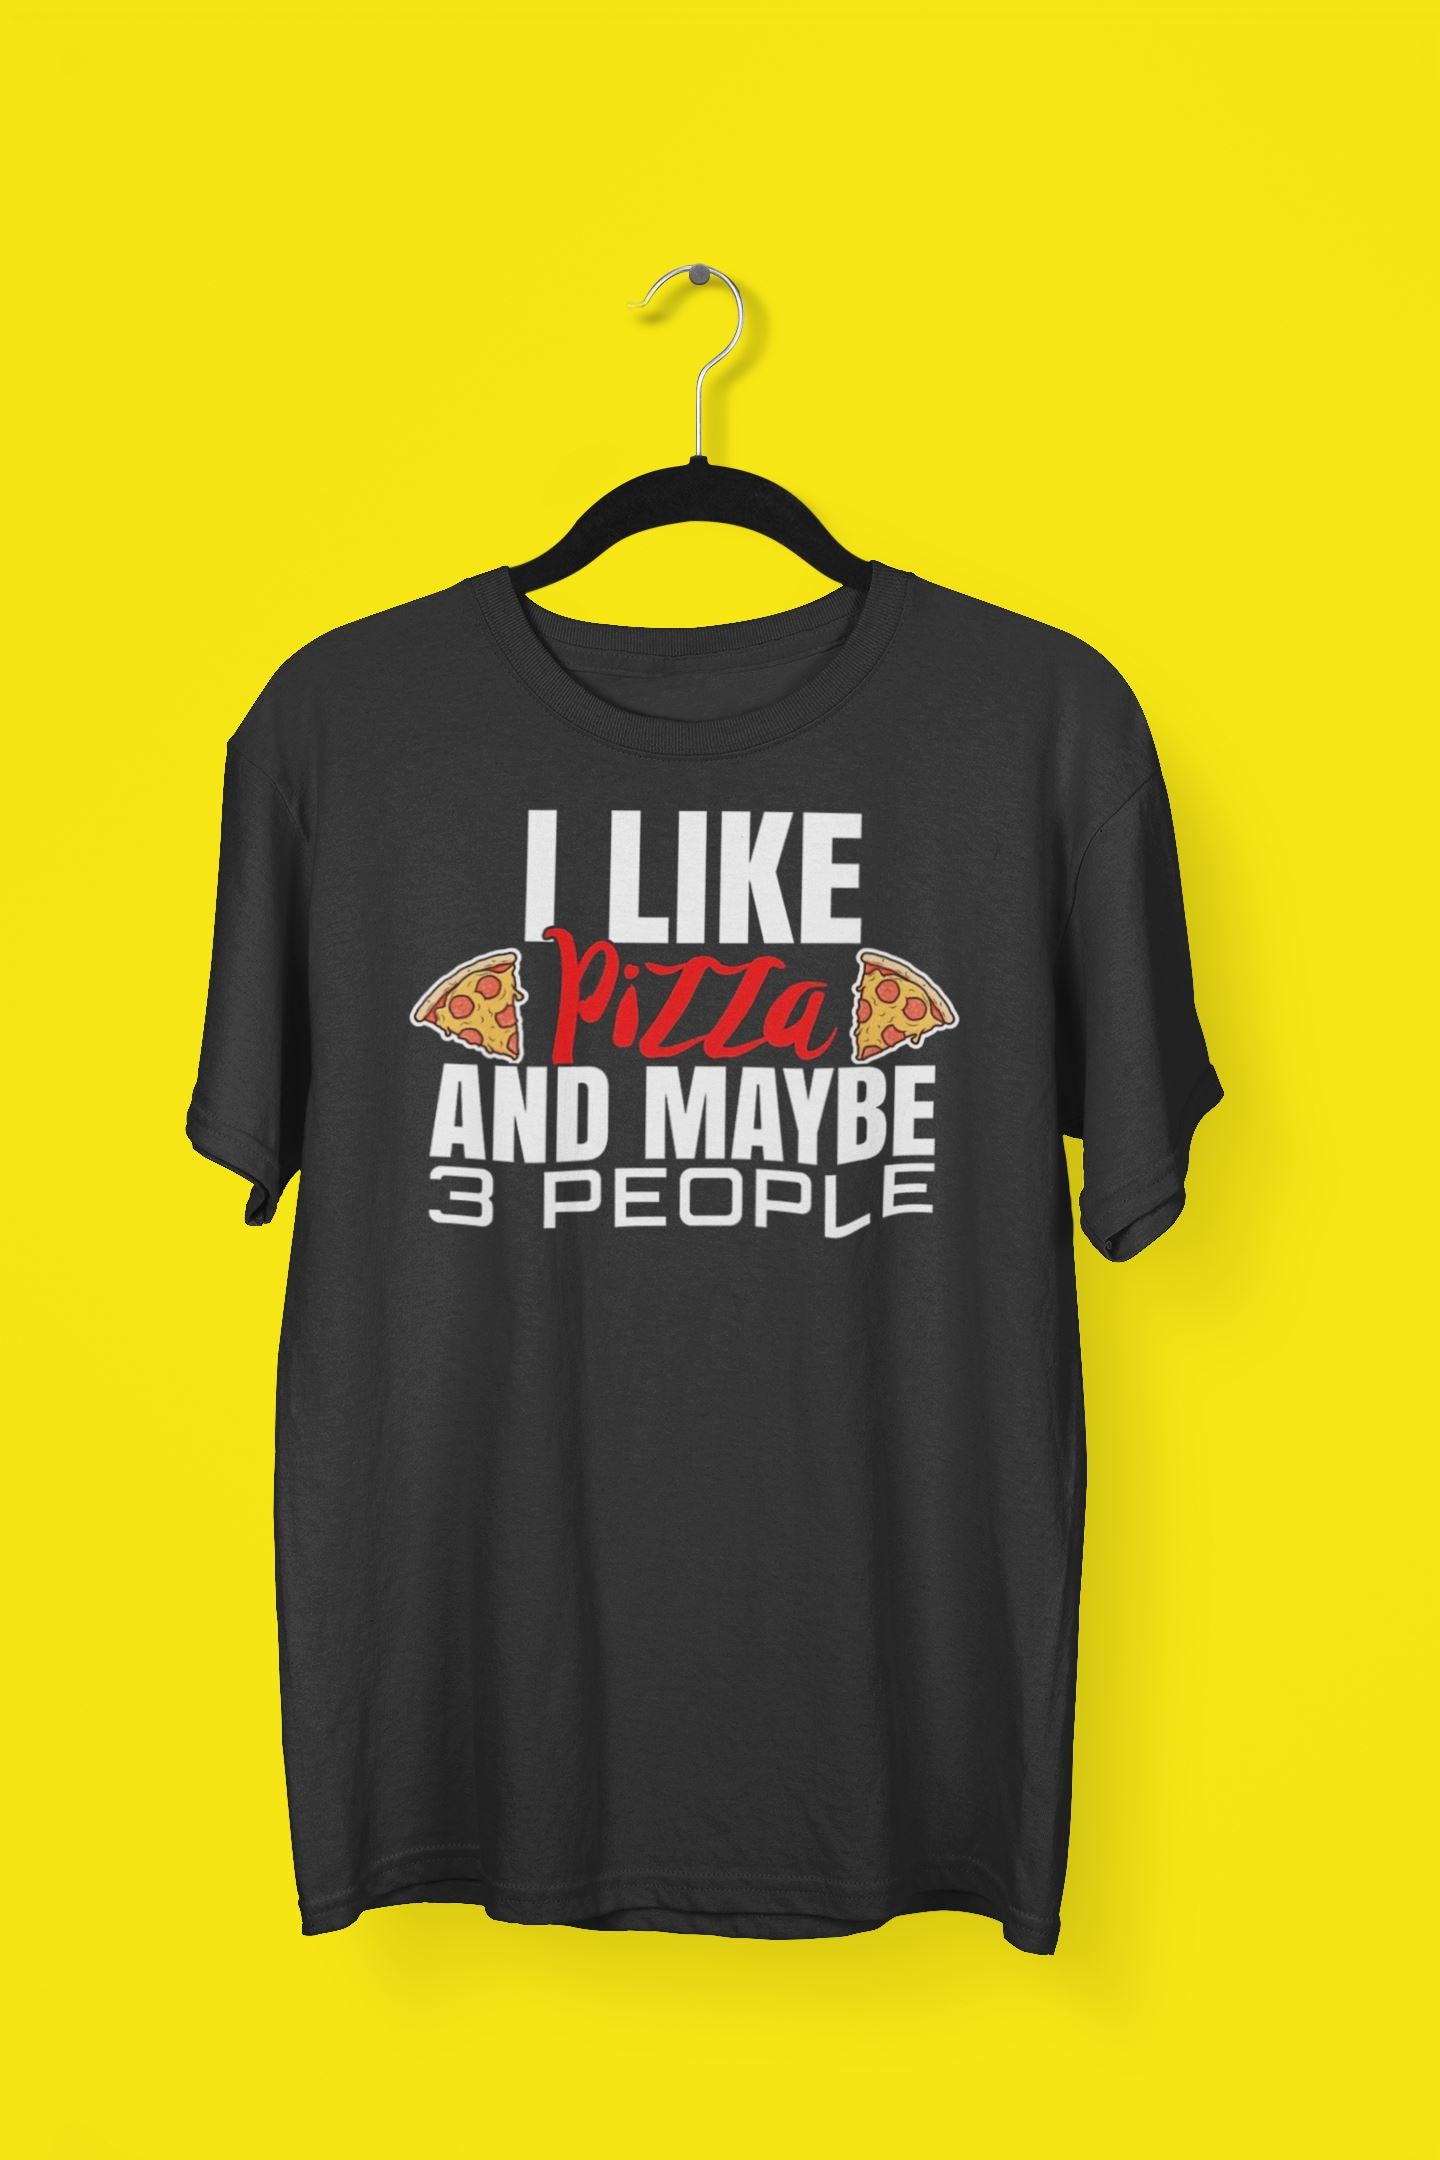 I Like Pizza and Maybe 3 People Funny Black T Shirt for Men and Women freeshipping - Catch My Drift India